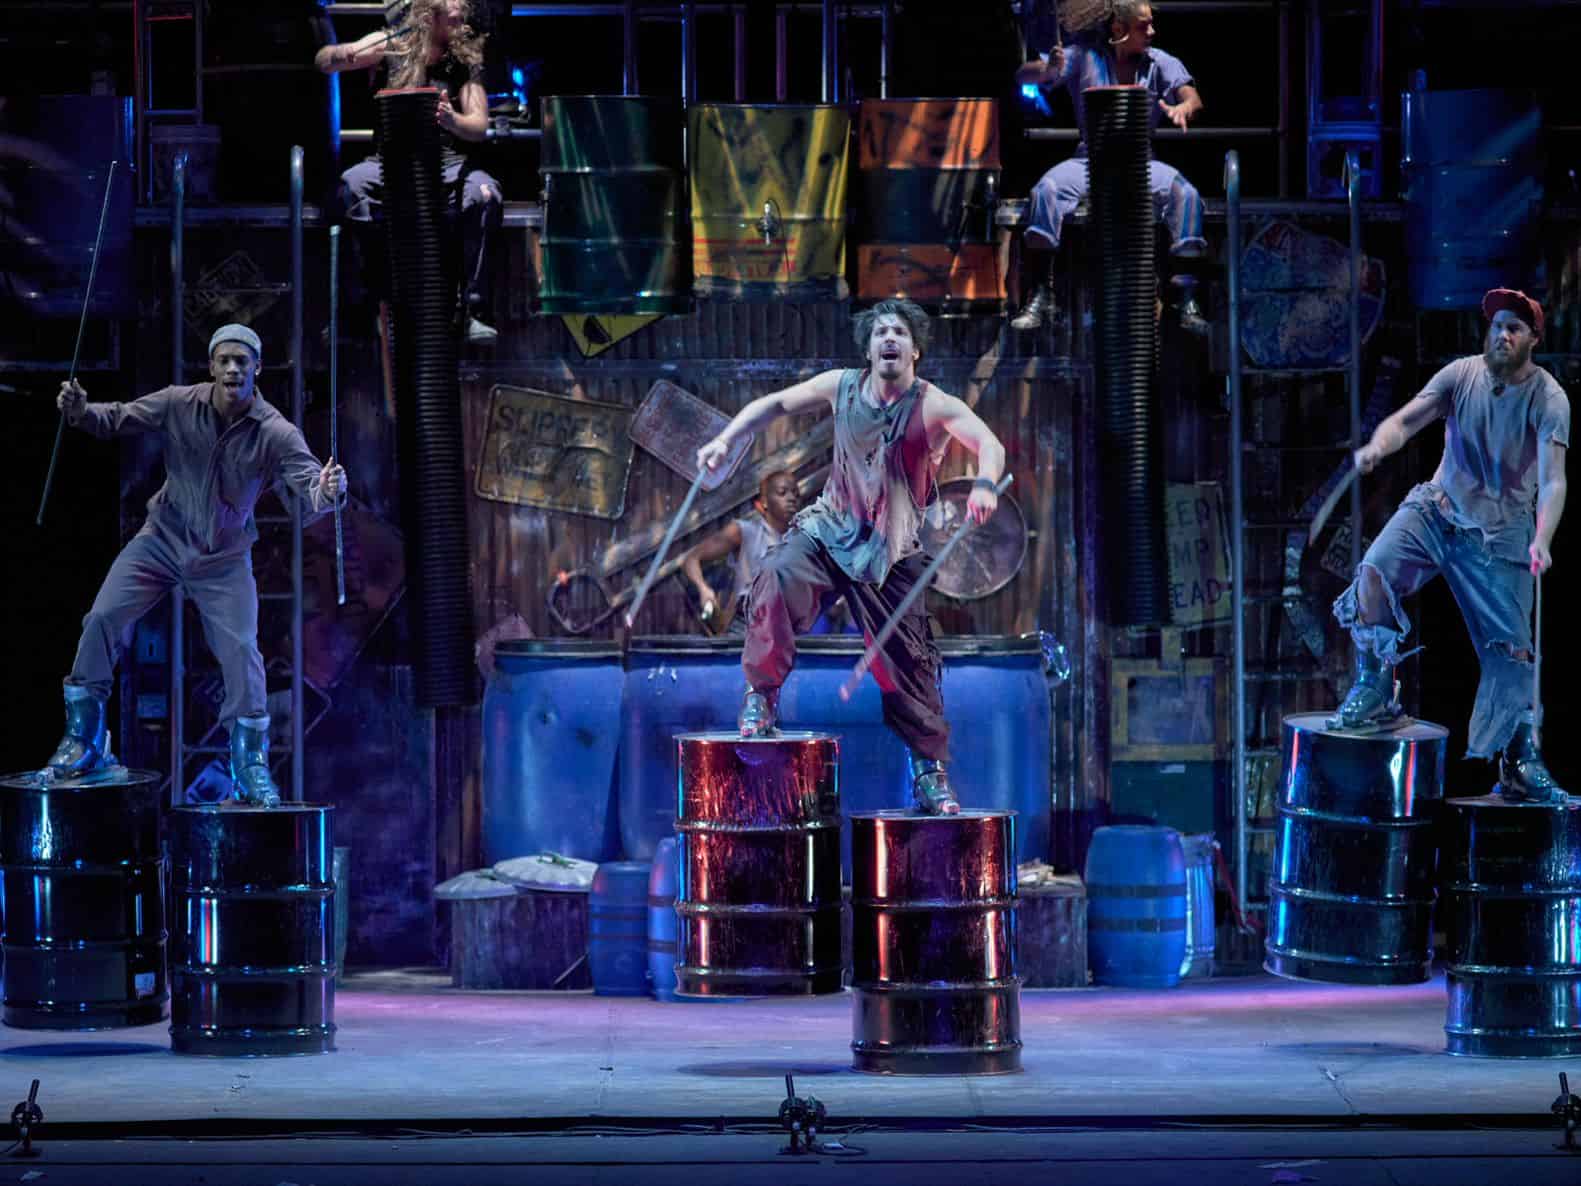 Performers from STOMP appear on an open industrial stage. Three performers are downstage standing on top of aluminum trash cans with large drum sticks in the midst of a dance. They are wearing clothing in a gray color scale with a distressed aesthetic.